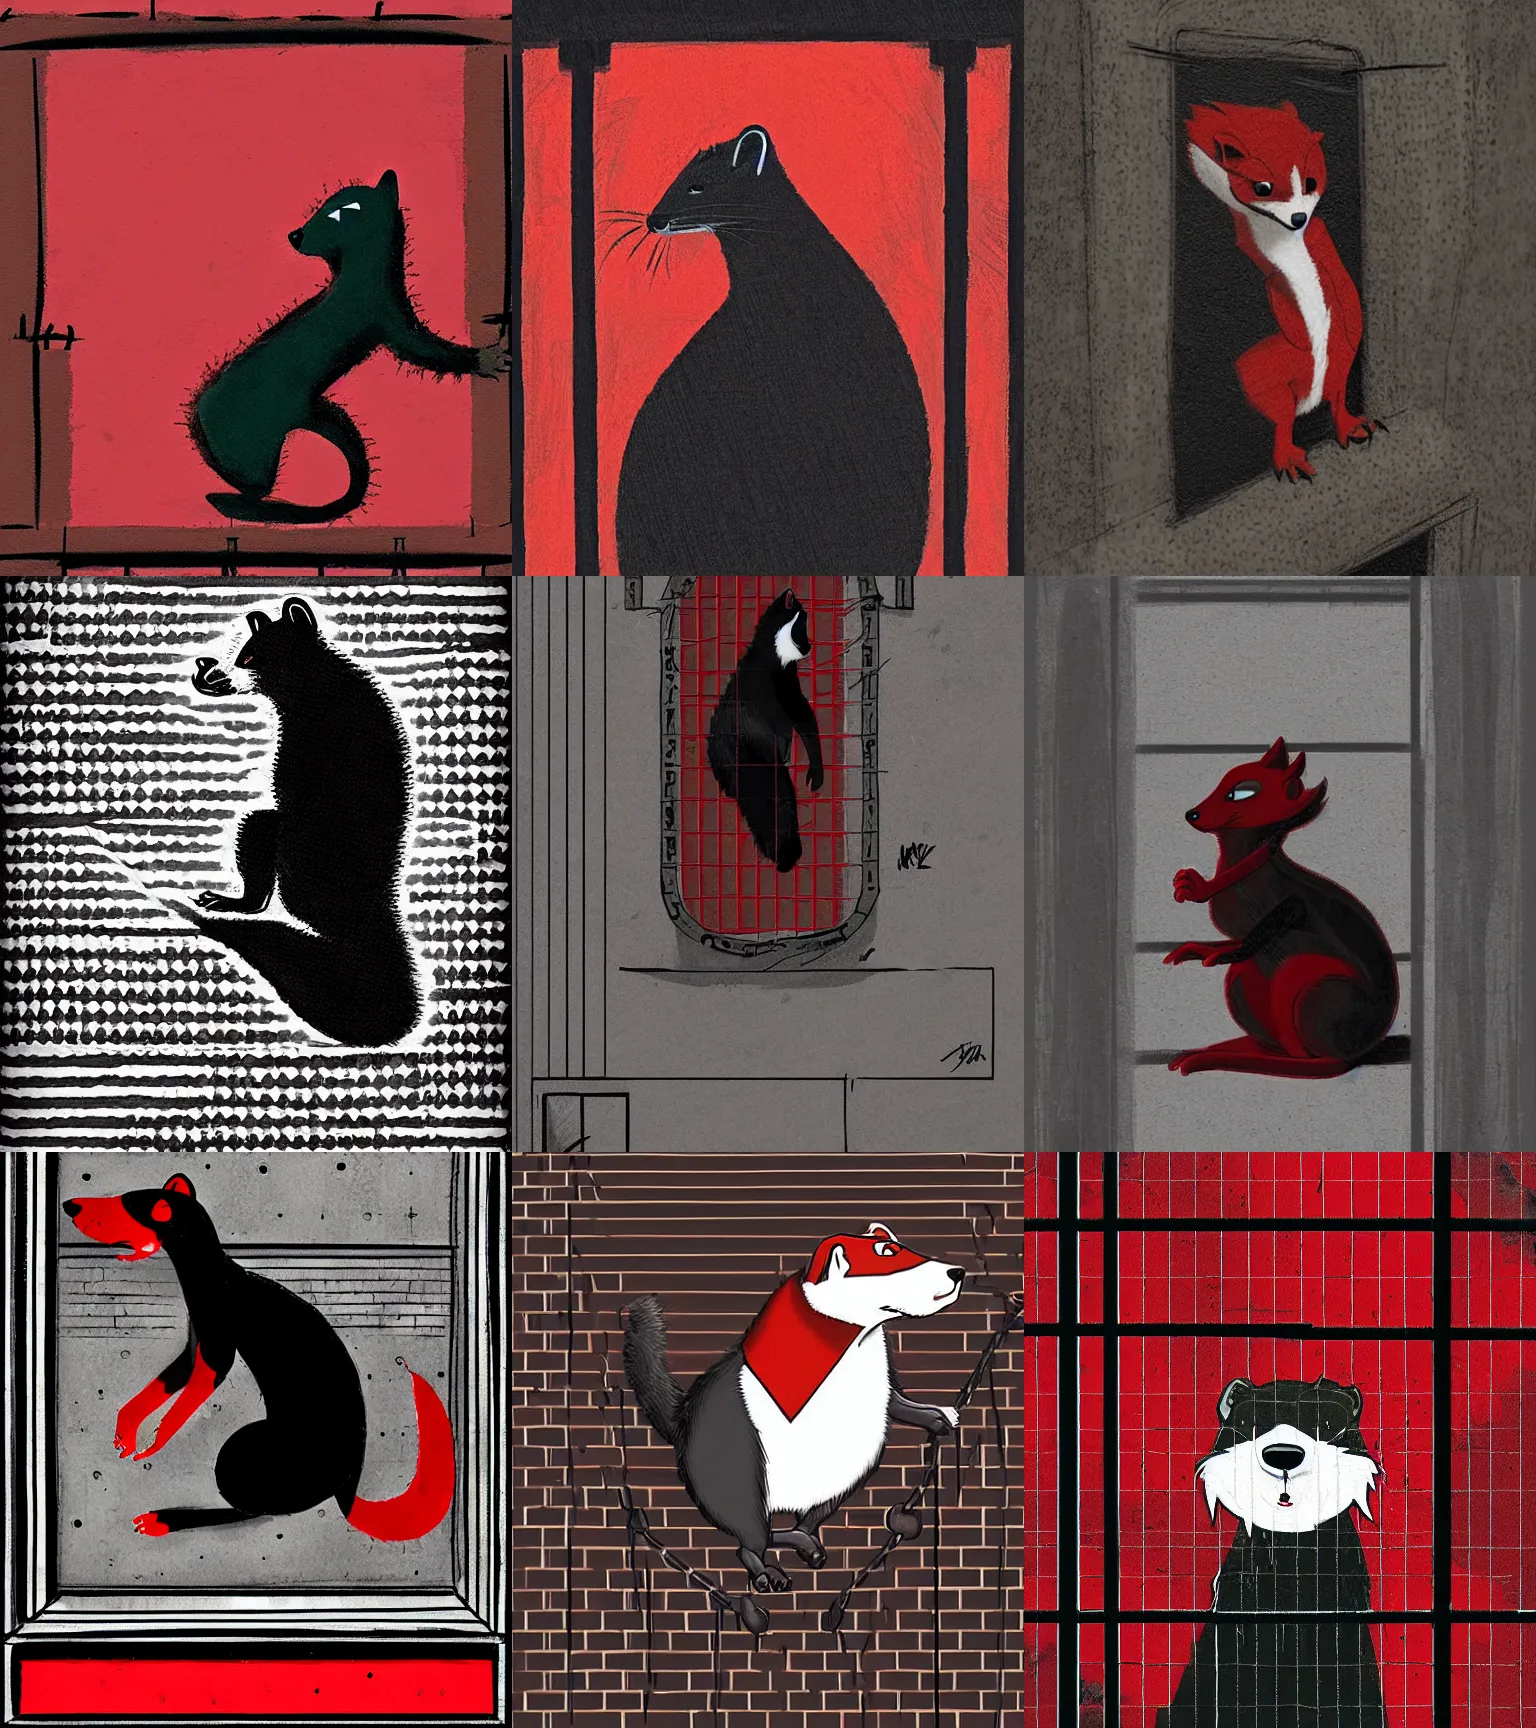 Prompt: red - and - black weasel / stoat fursona ( furry fandom ), neo - noir setting, detective fiction inspired art tone, artistic medium is scratching and chiseling on a prison cell wall in order to create cracks and impressions